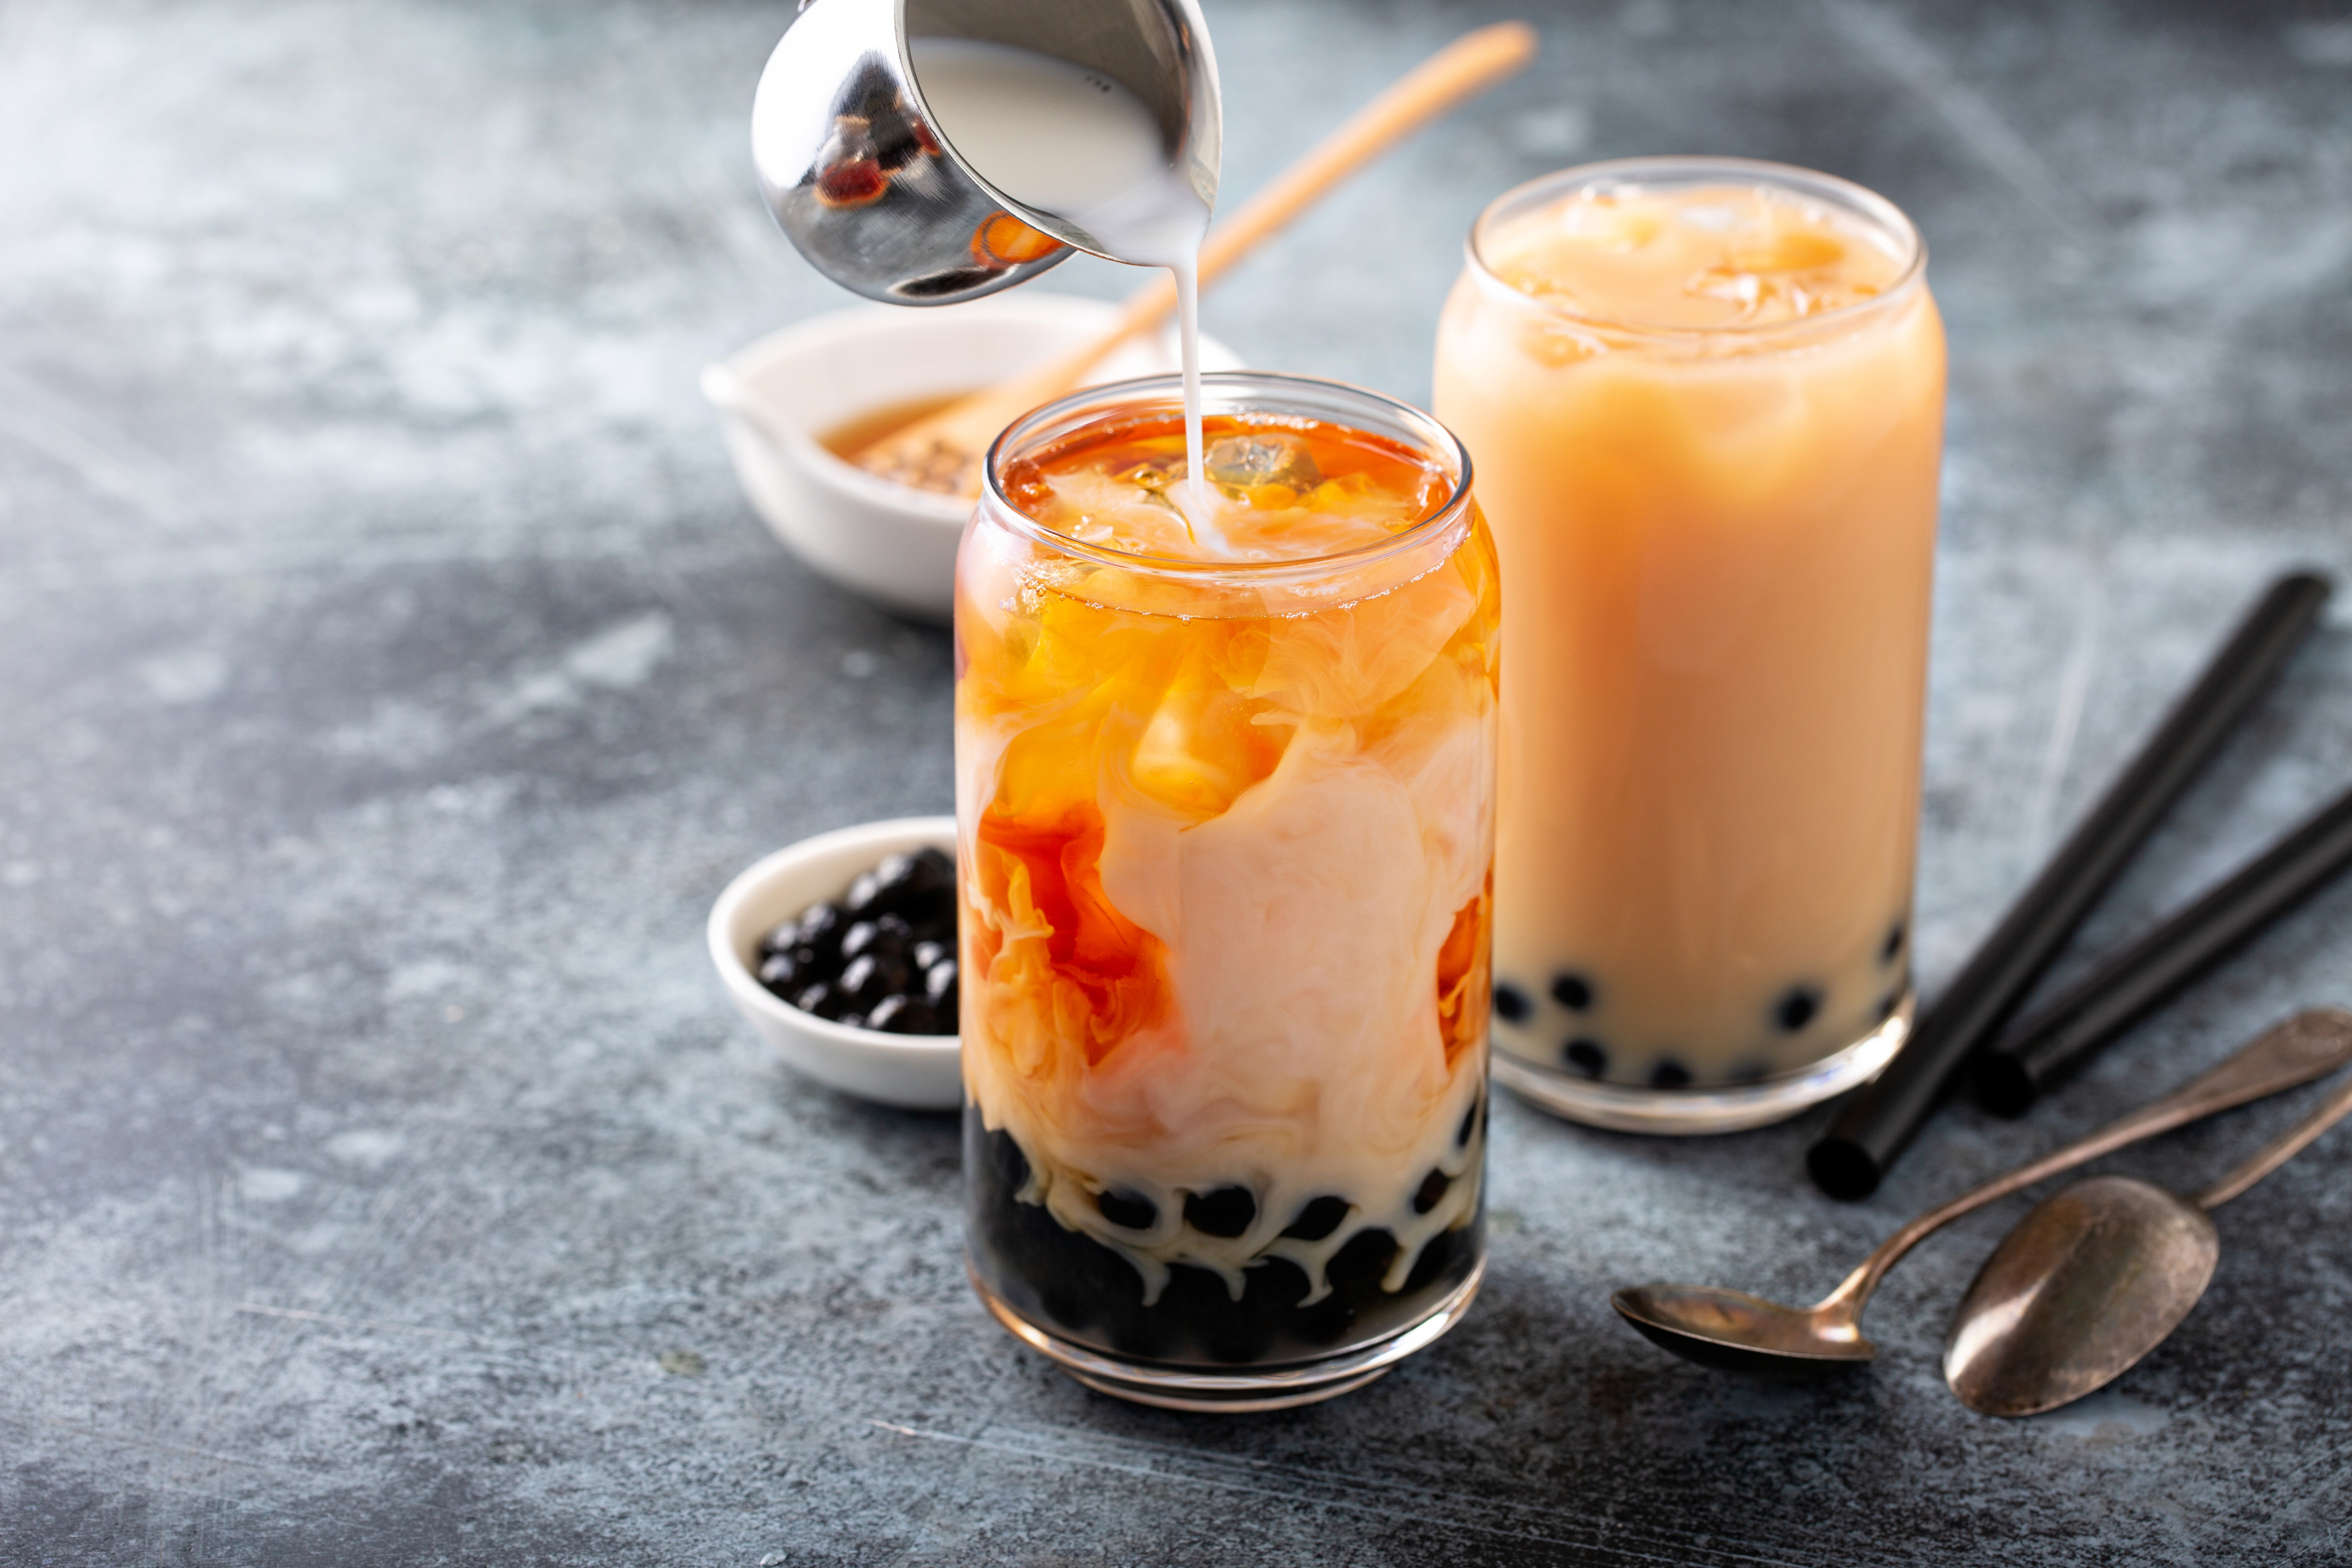 The boba’s texture is integral in determining how enjoyable the bubble tea will be. Photo: Shutterstock 